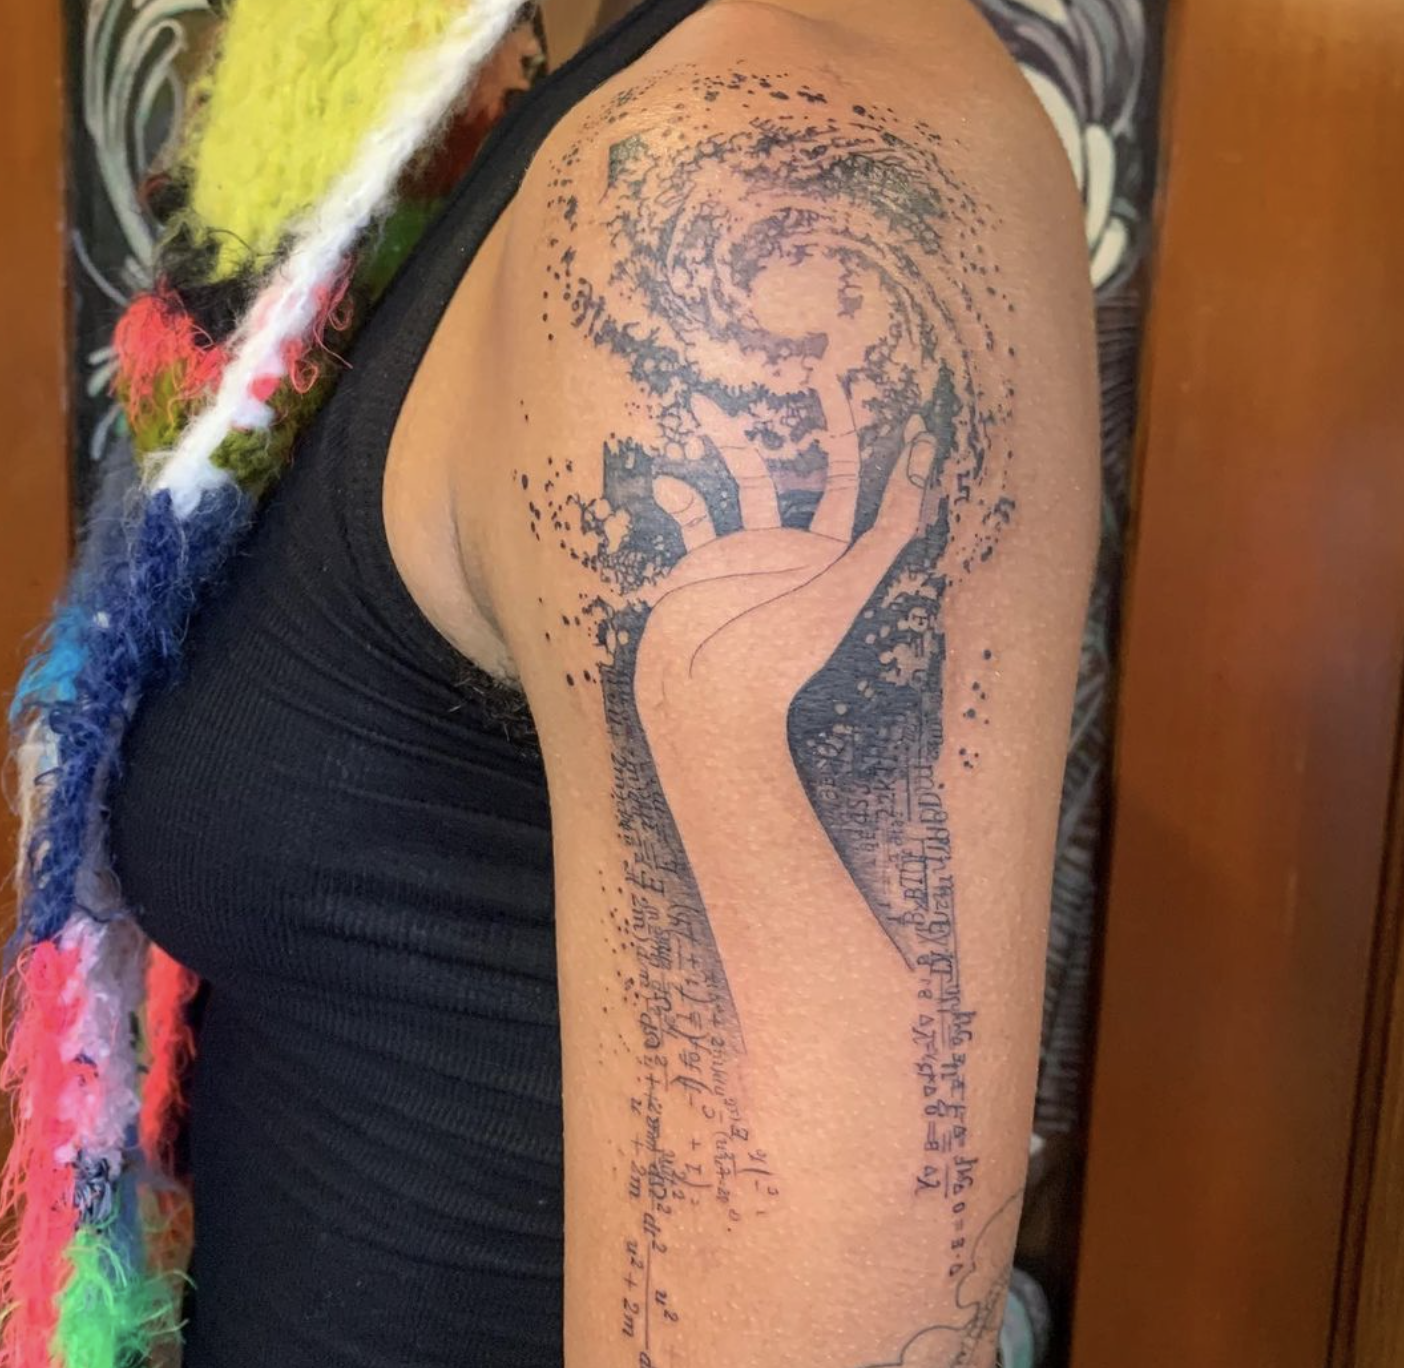 Willow Smith Unveils An Arm Tattoo Inspired By The Cosmos